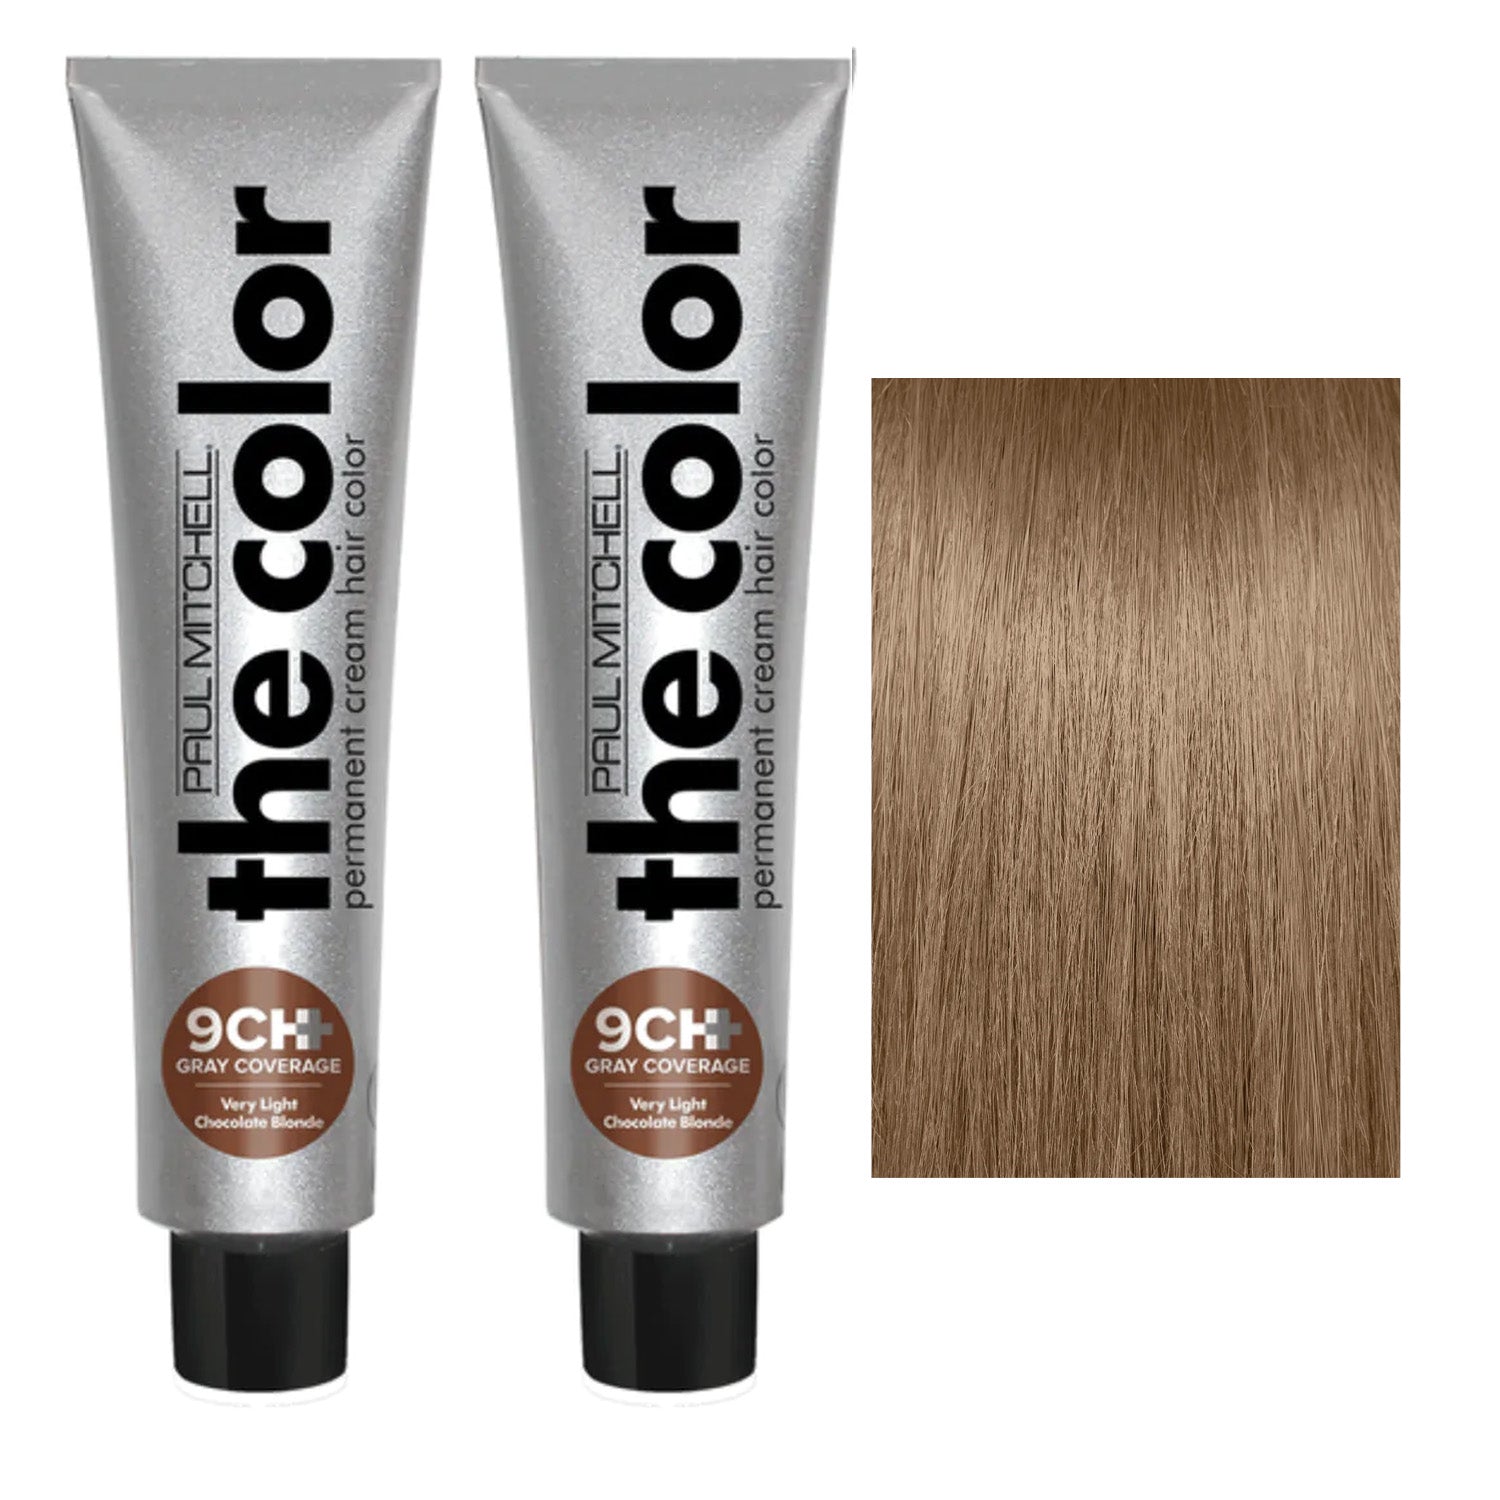 Paul Mitchell The Color N+ Gray Coverage Cream Type Hair Color Ash Level  3oz / 90ml with Ammonia Beeswax Base Formula